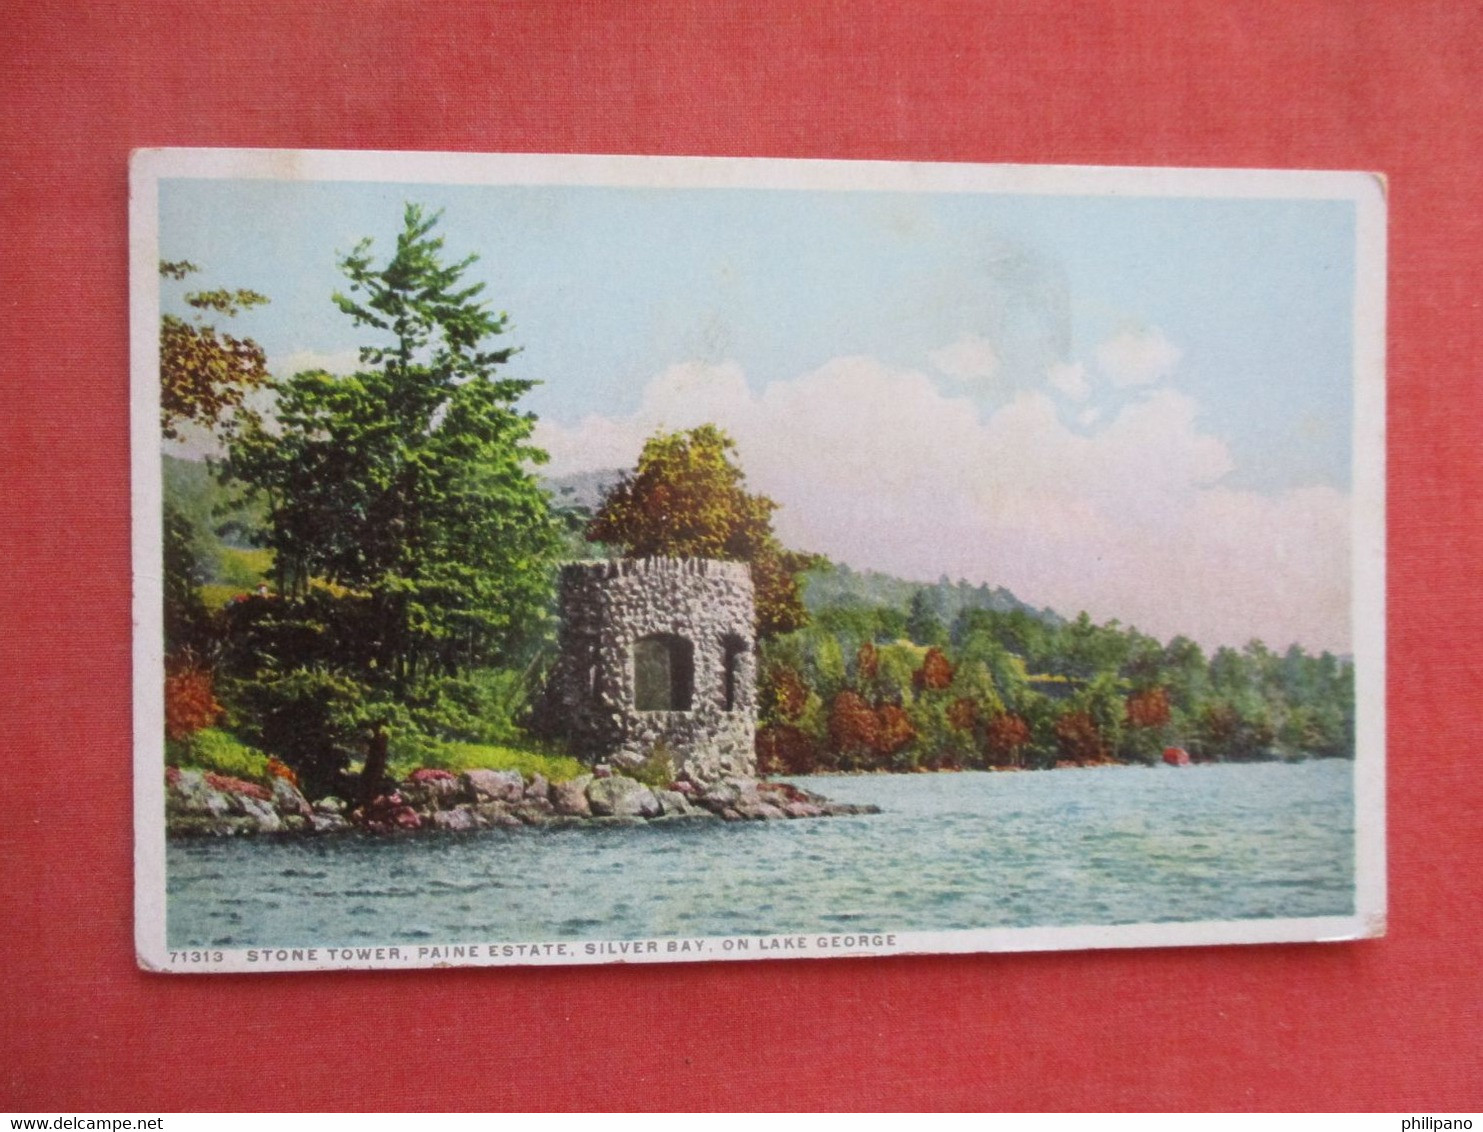 Stone Tower Paine Estate Silver Bay  On Lake George  New York > Lake George          Ref 5936 - Lake George